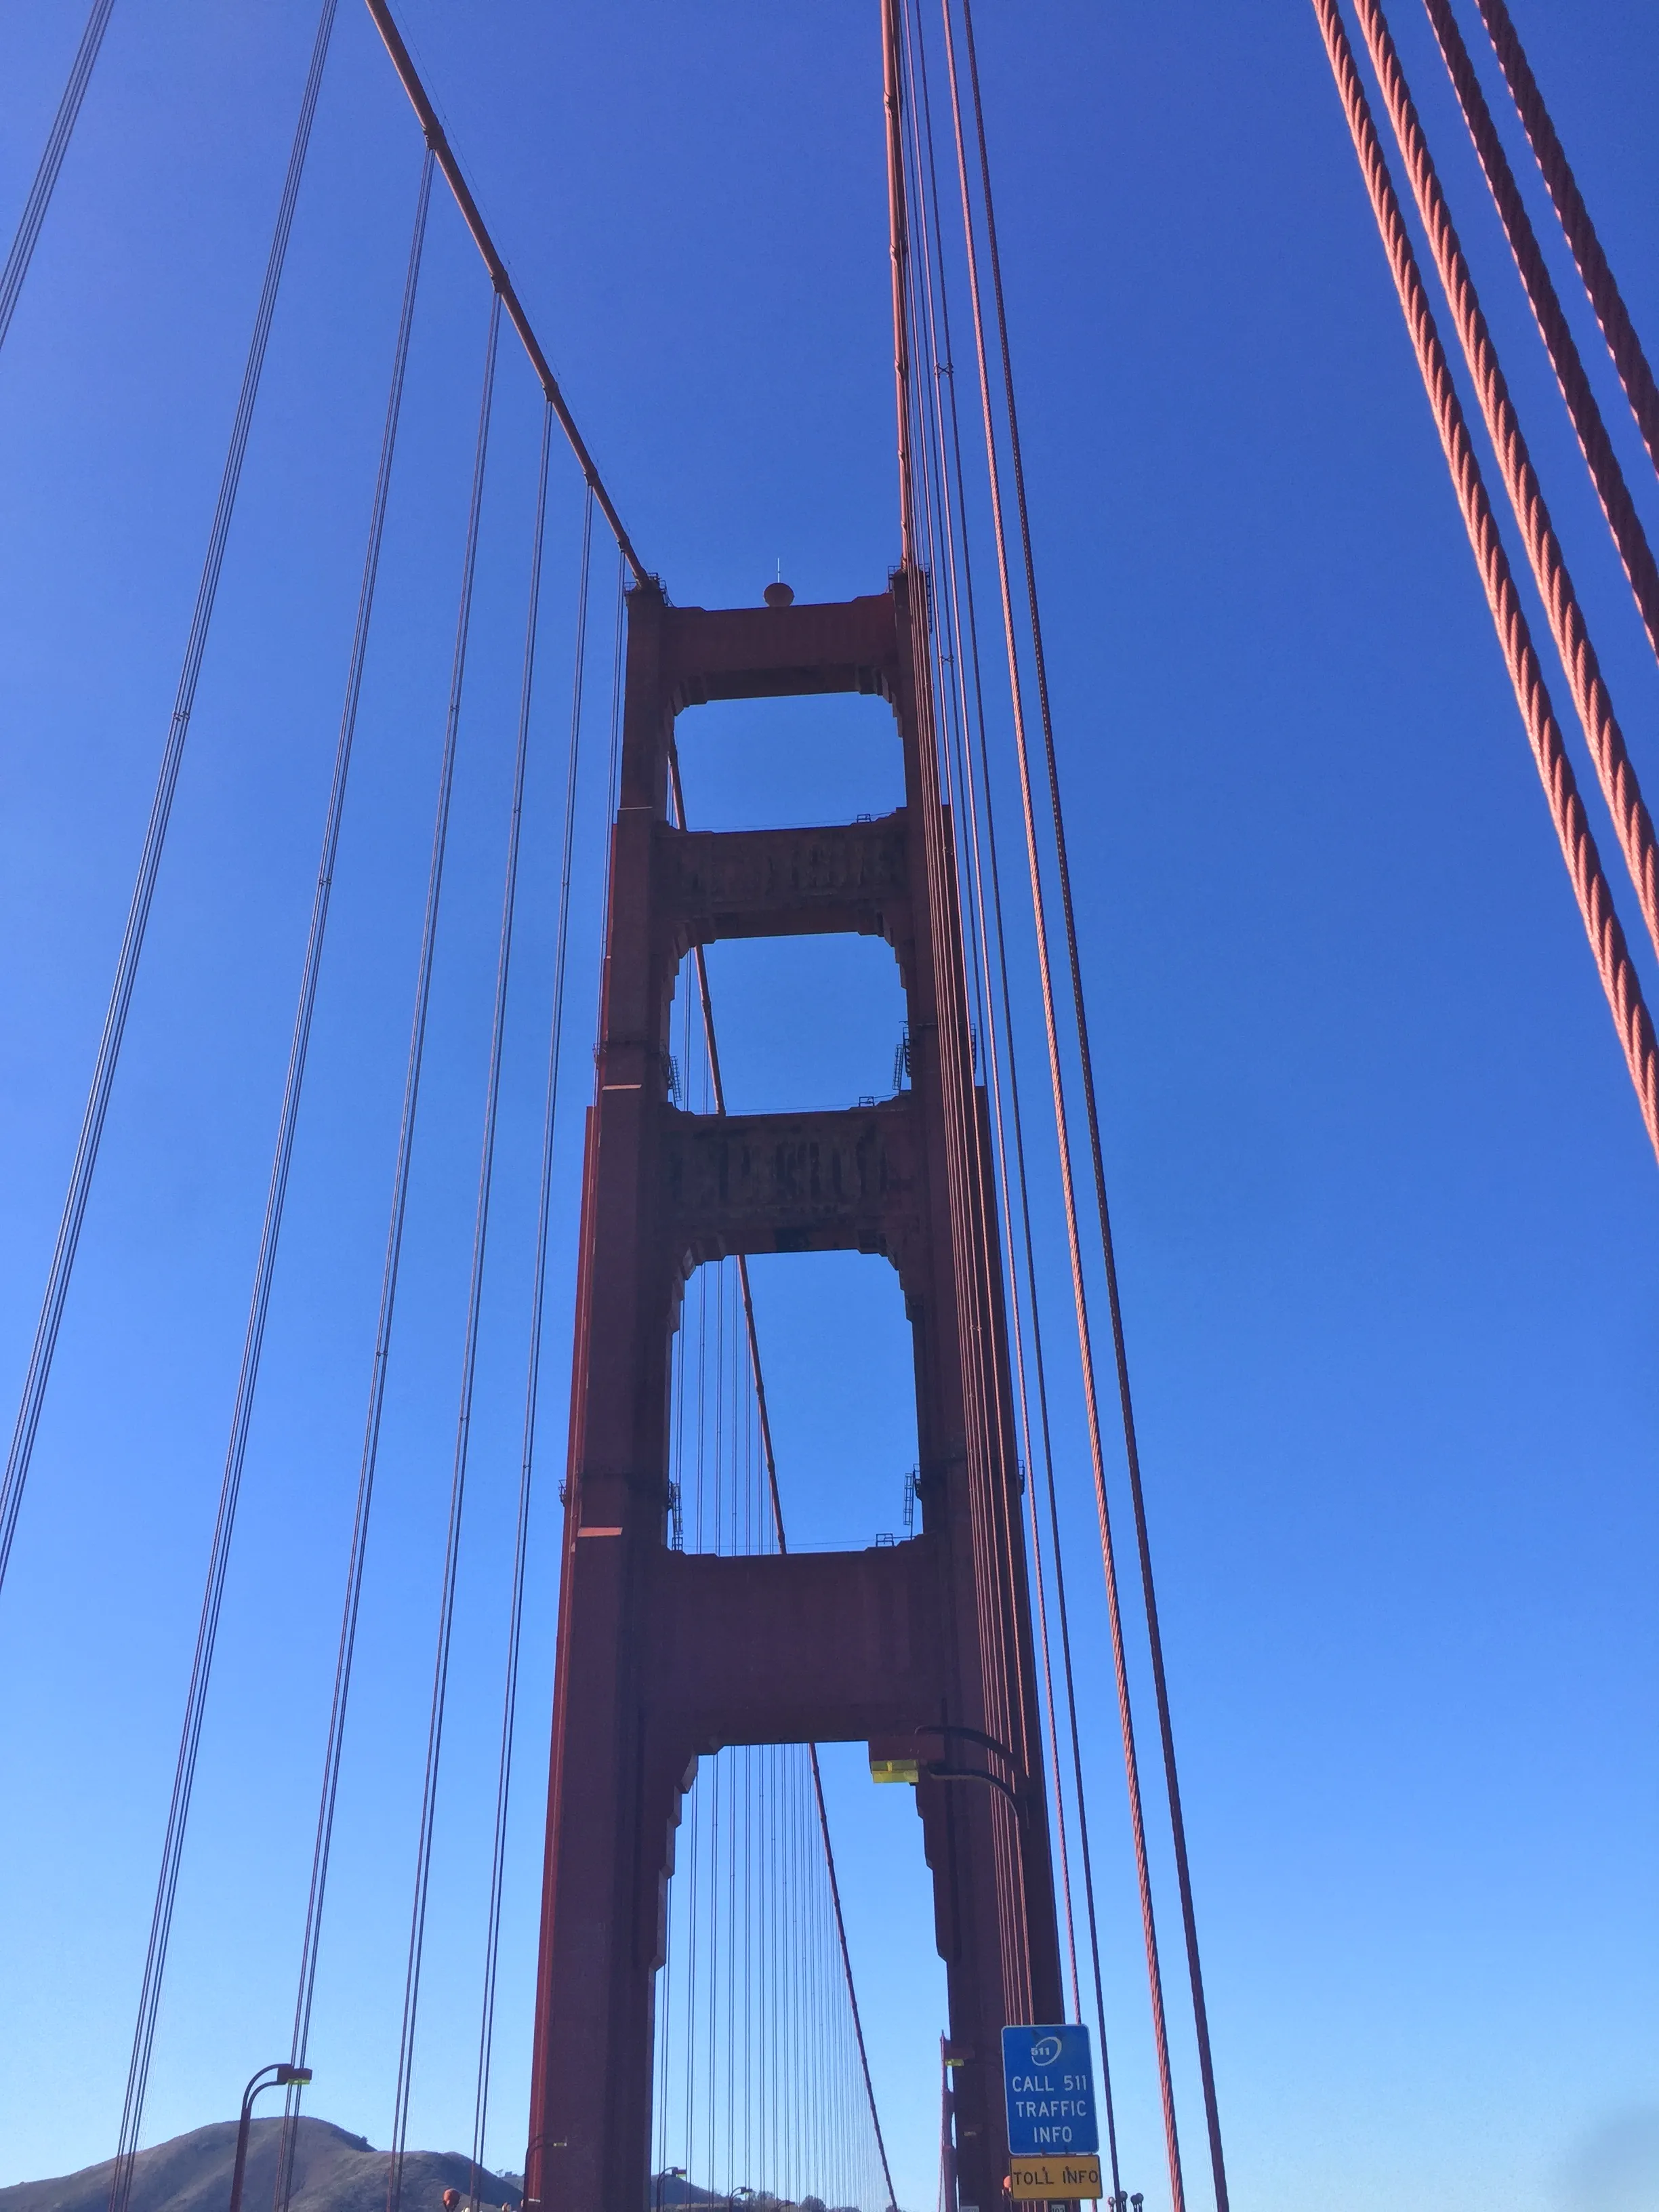 Walking the bridge. Pictures can't describe the moment I looked
up.